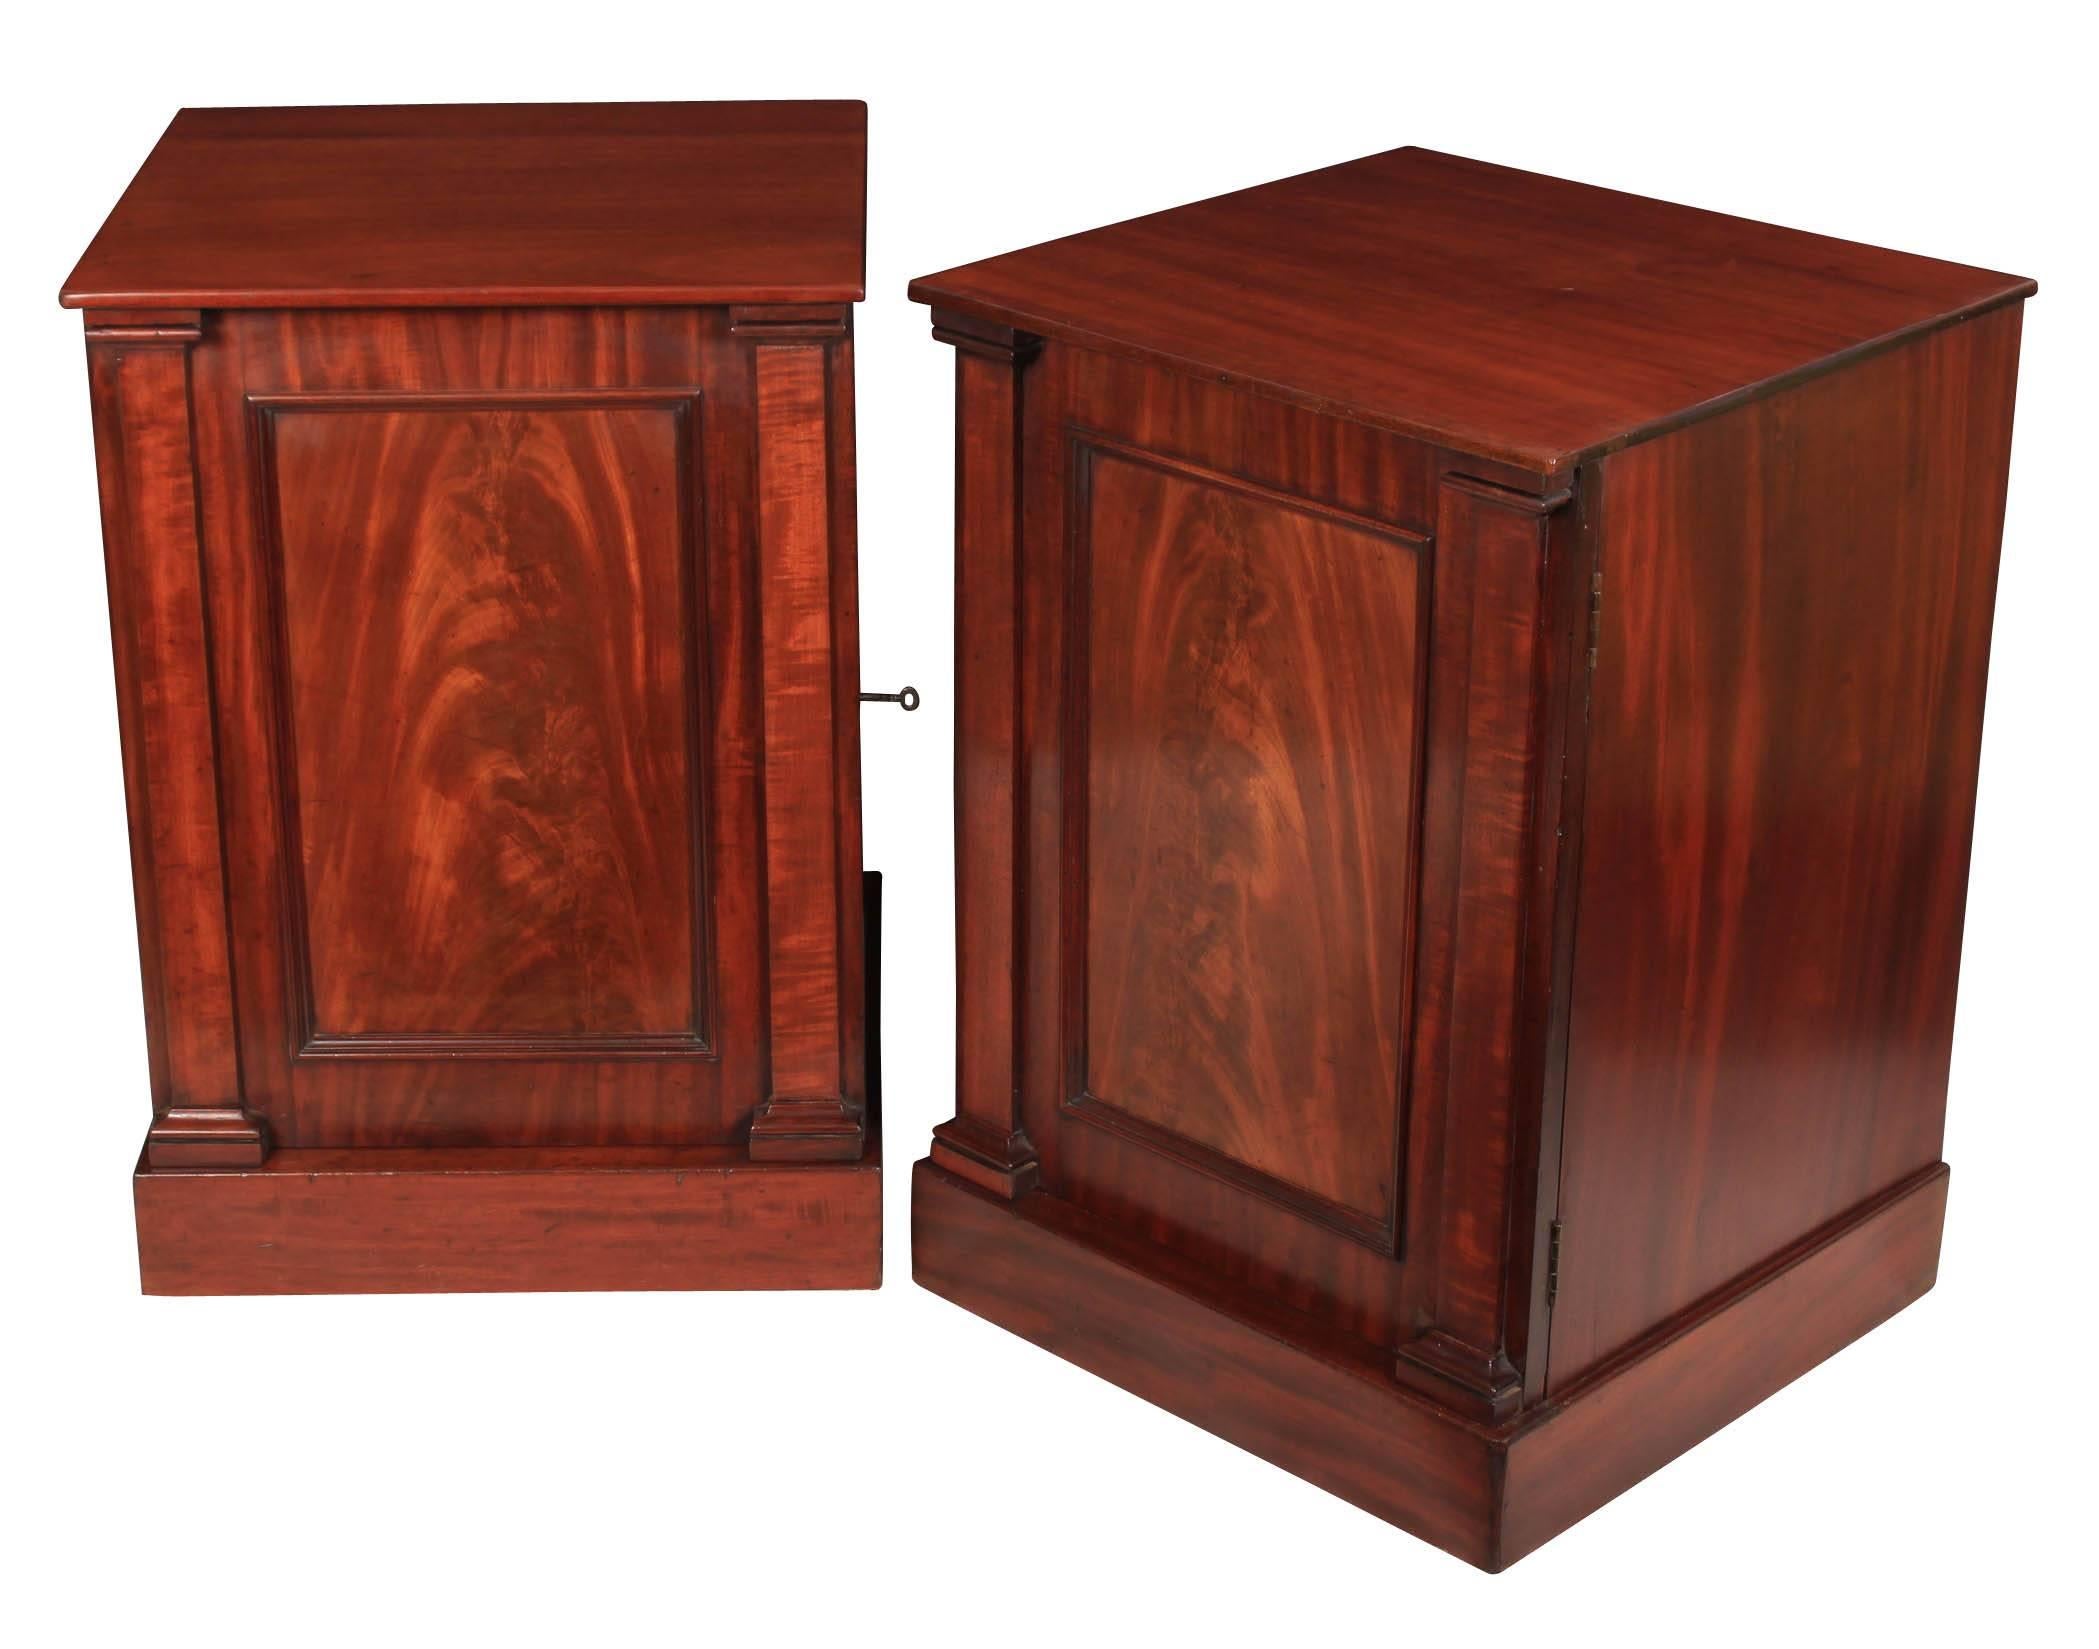 English, circa 1820.
These bedside cabinets are in showroom condition.
Solid mahogany tops over a single panelled door on each with flame mahogany fronts.
The doors open to reveal a single removable shelf.
On a plinth base.

Measure: W